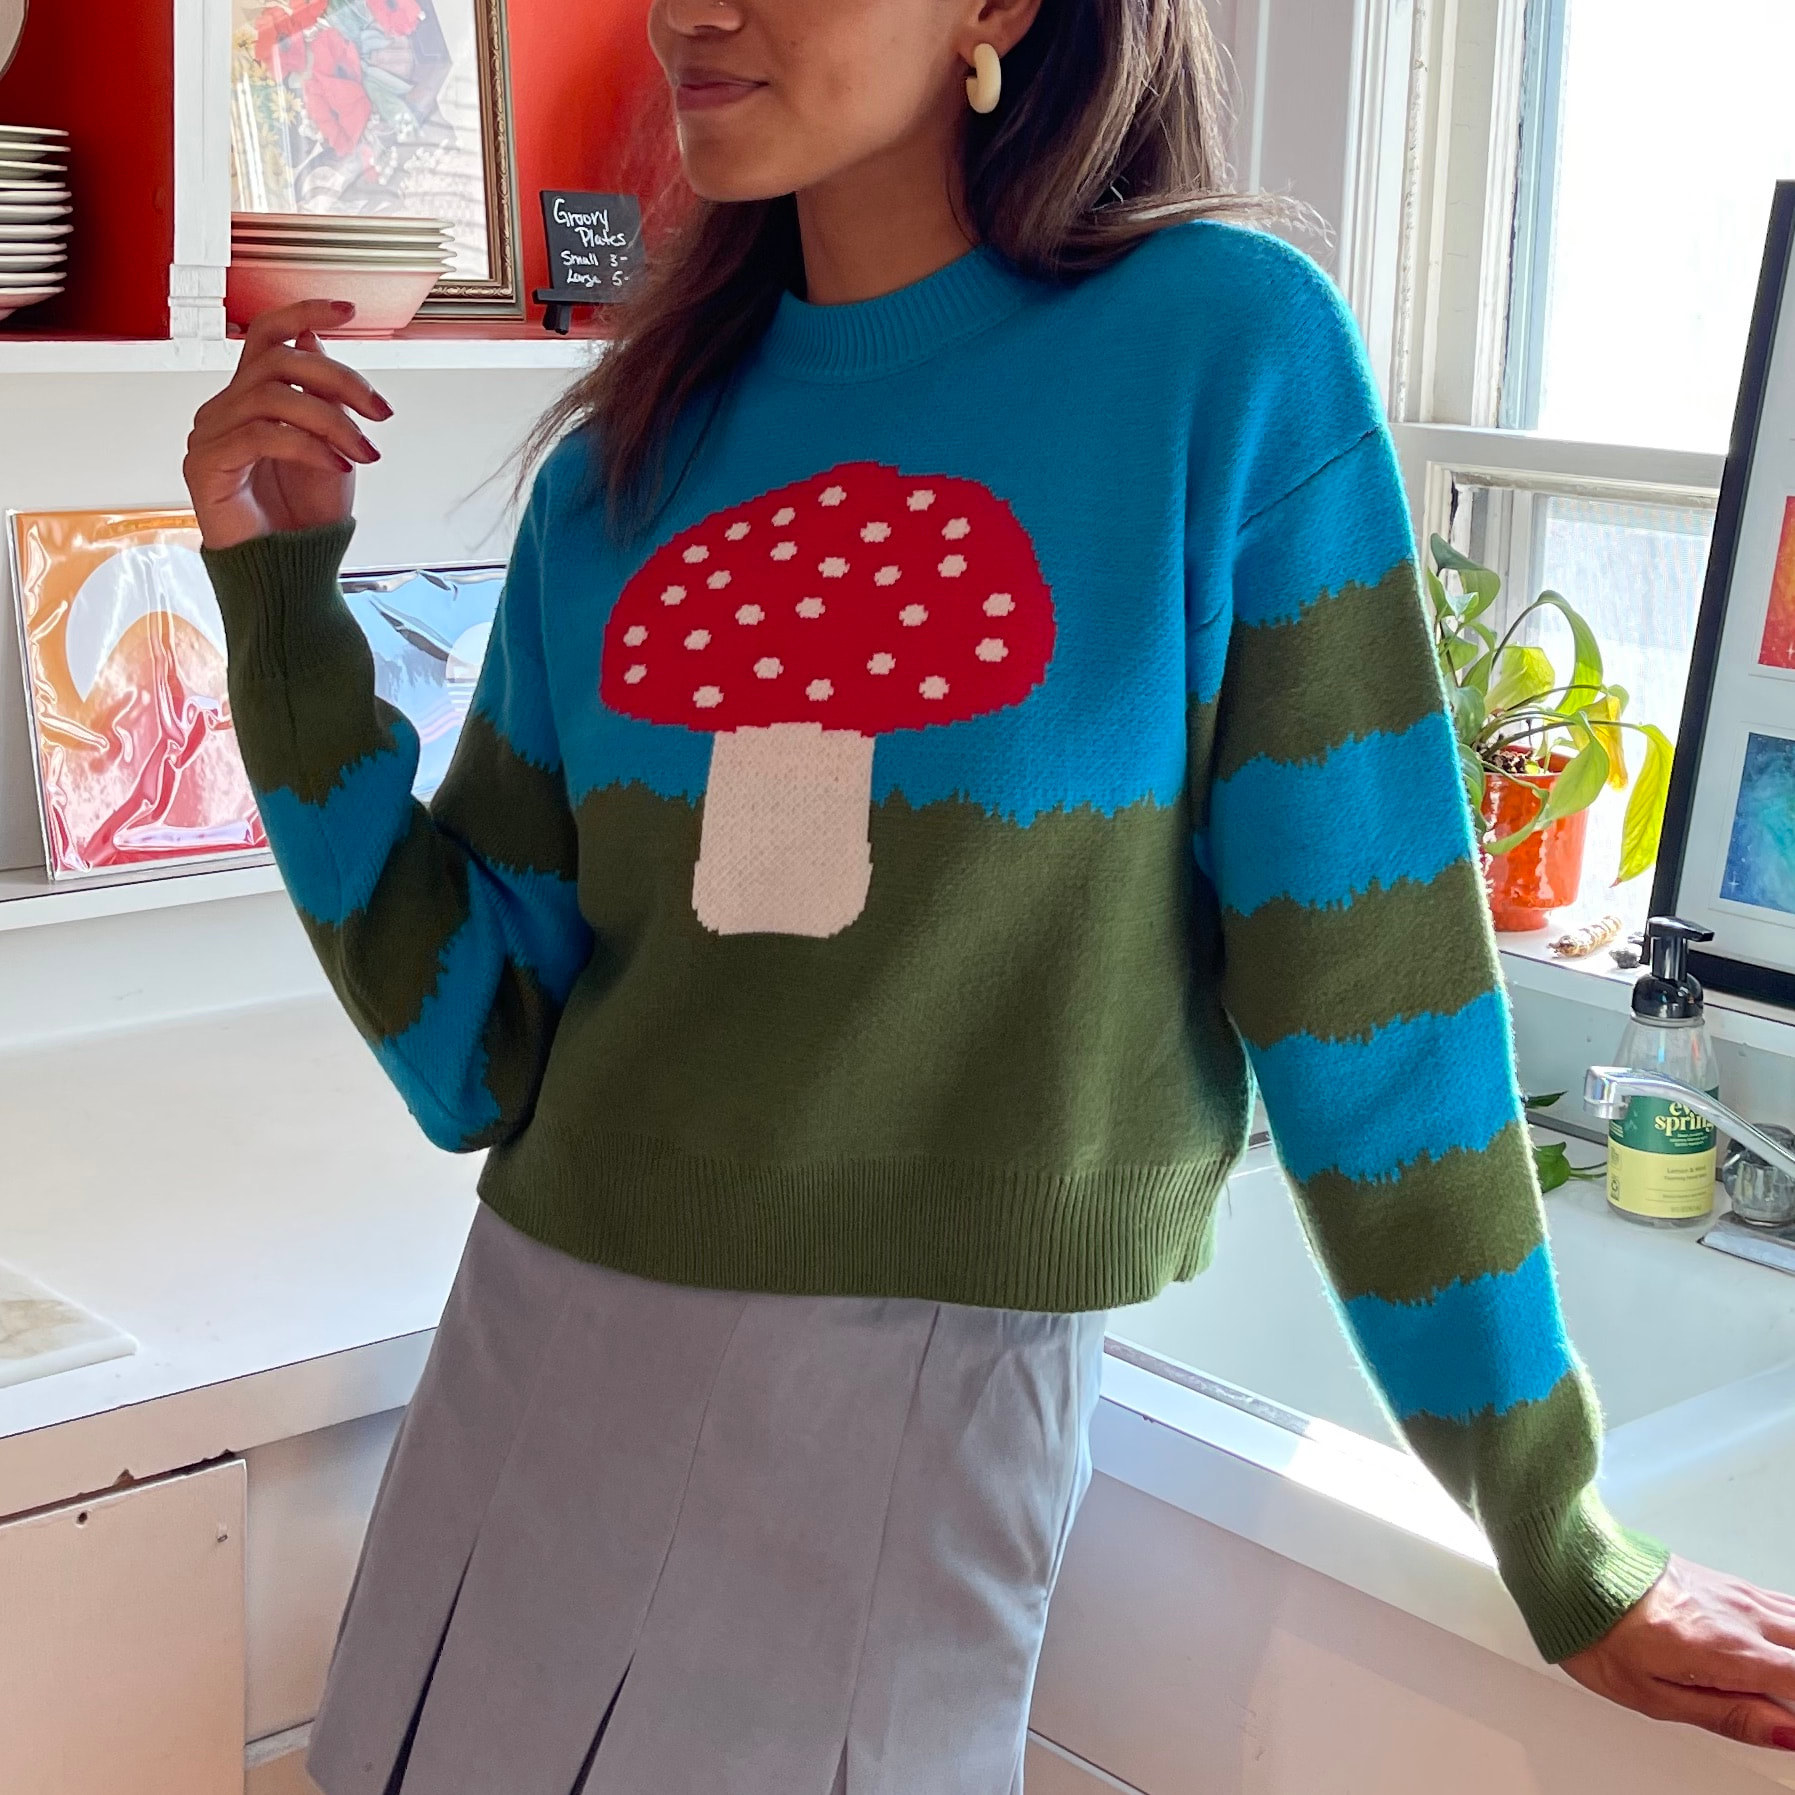 model wearing the blue and green sweater with red and white mushroom on it